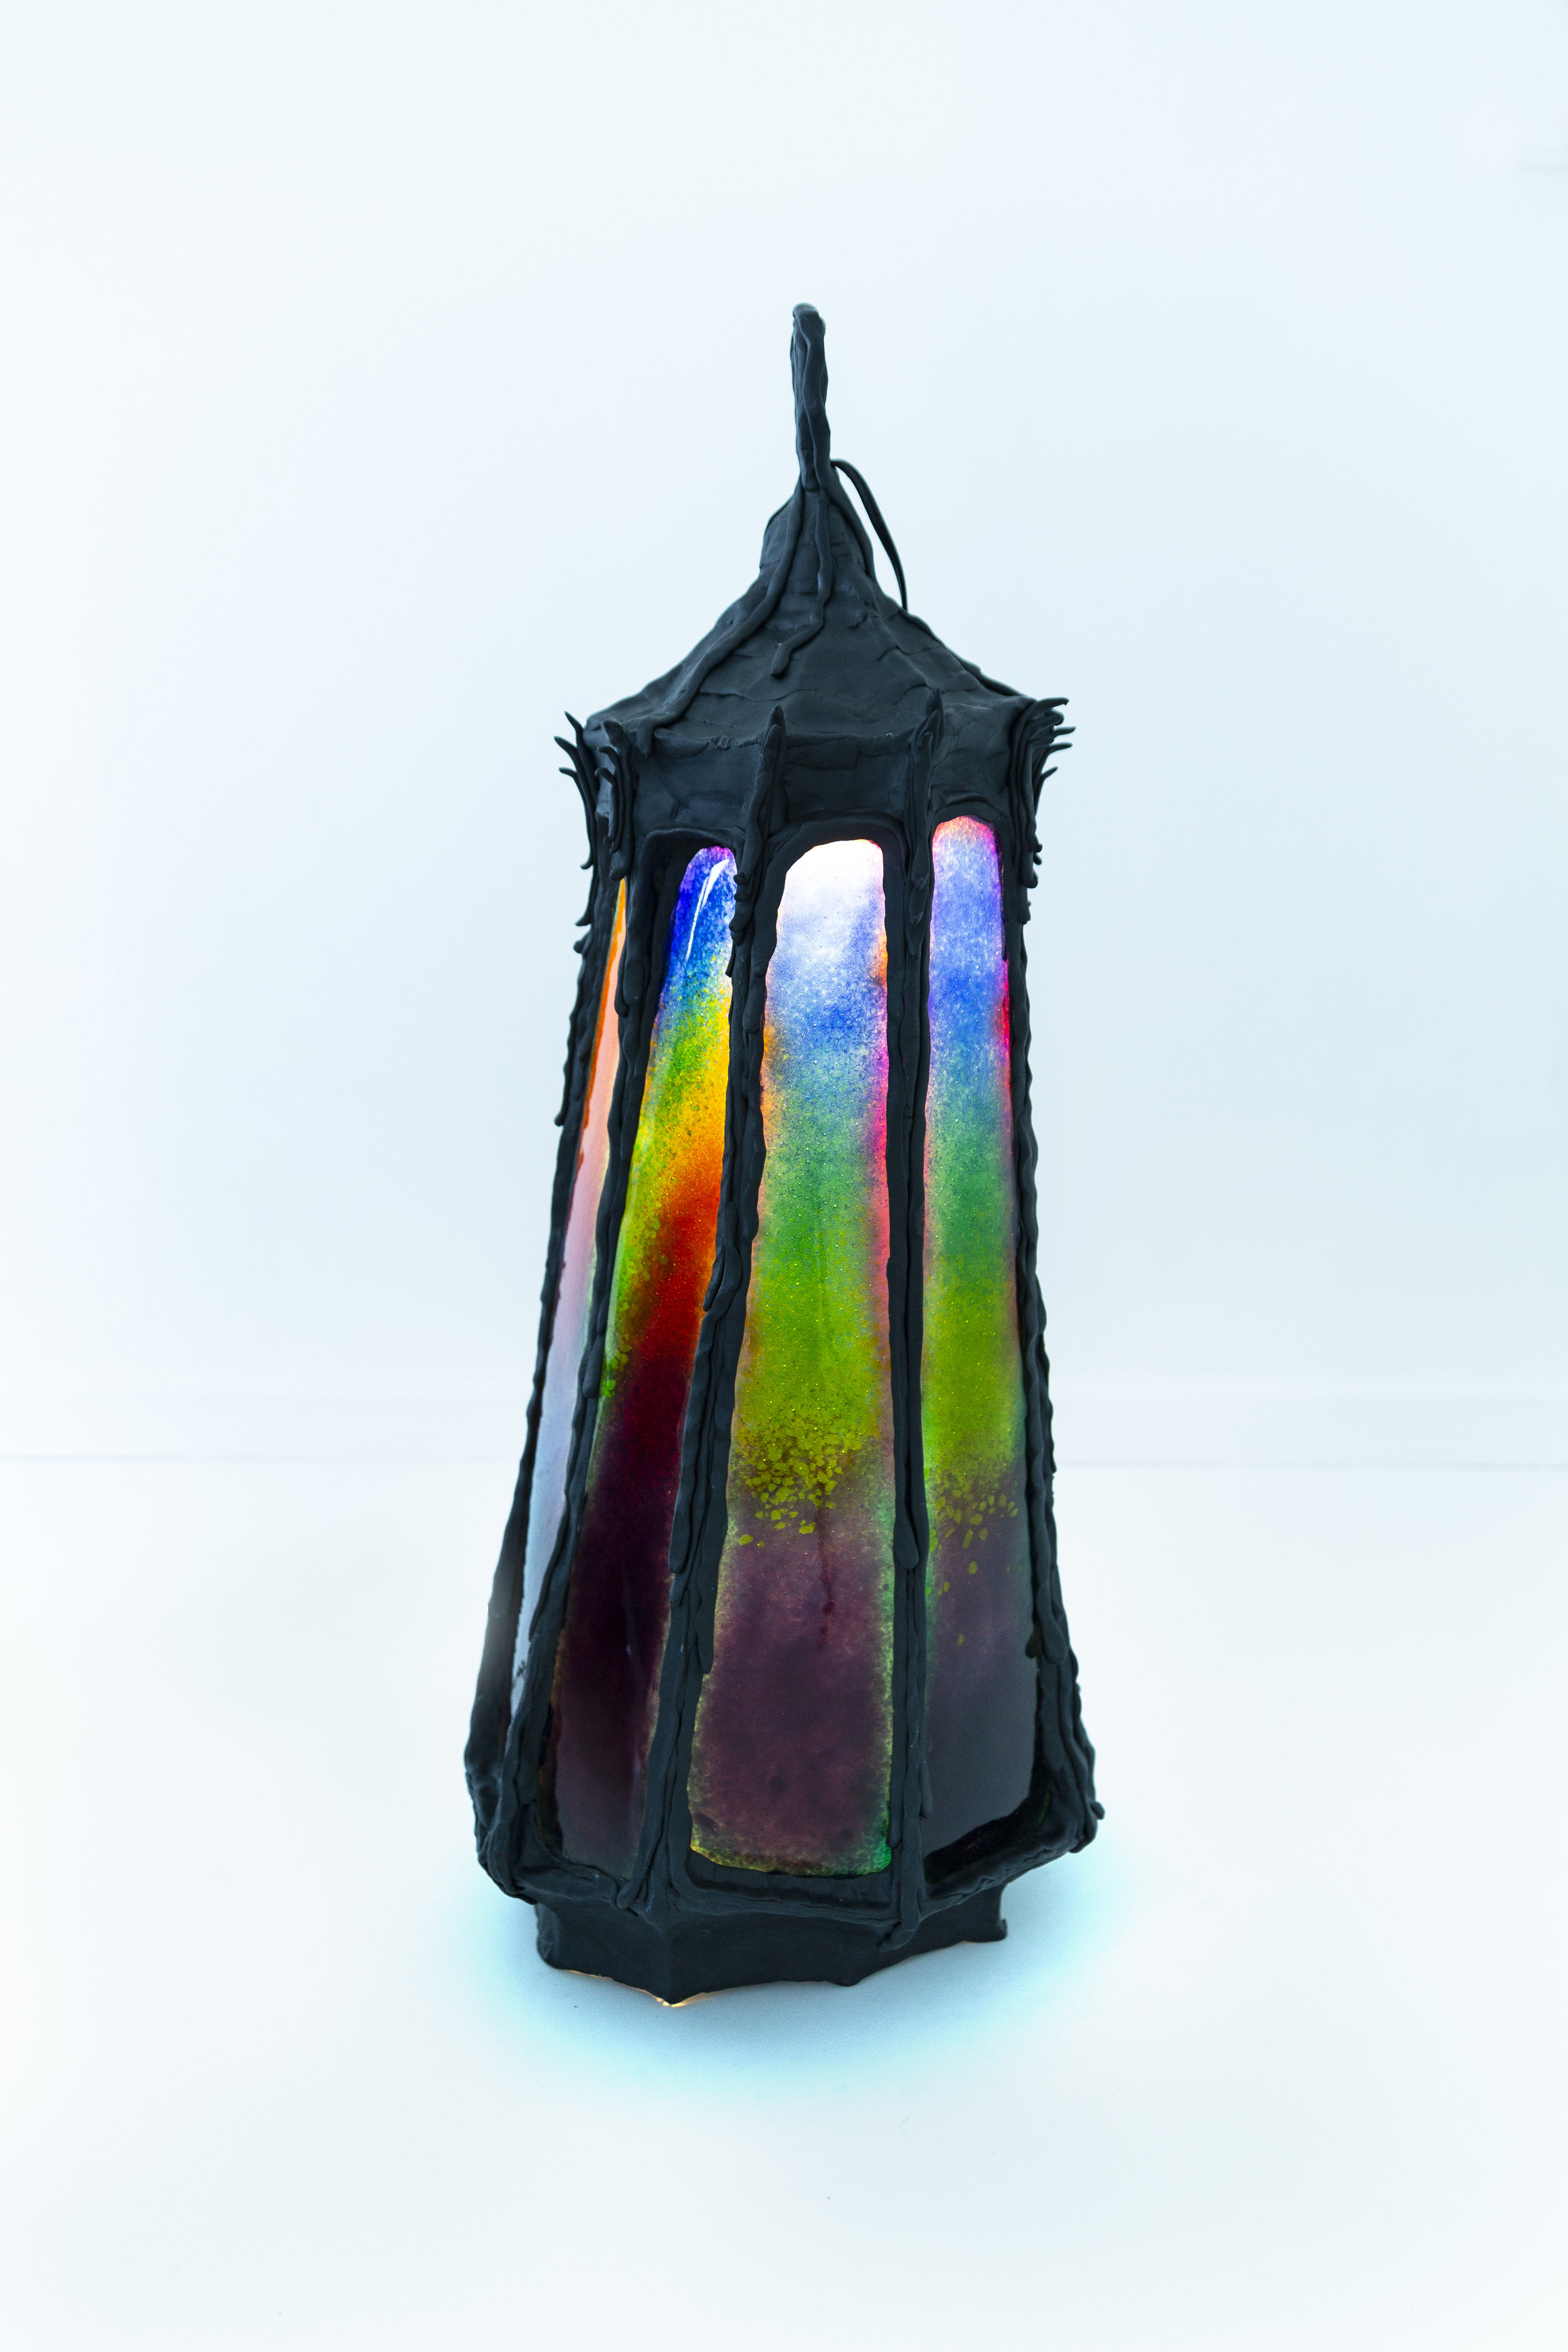  Dani Tull  Lantern 2, 2019  Mixed materials and fused-glass  31” x 17 x 17” 